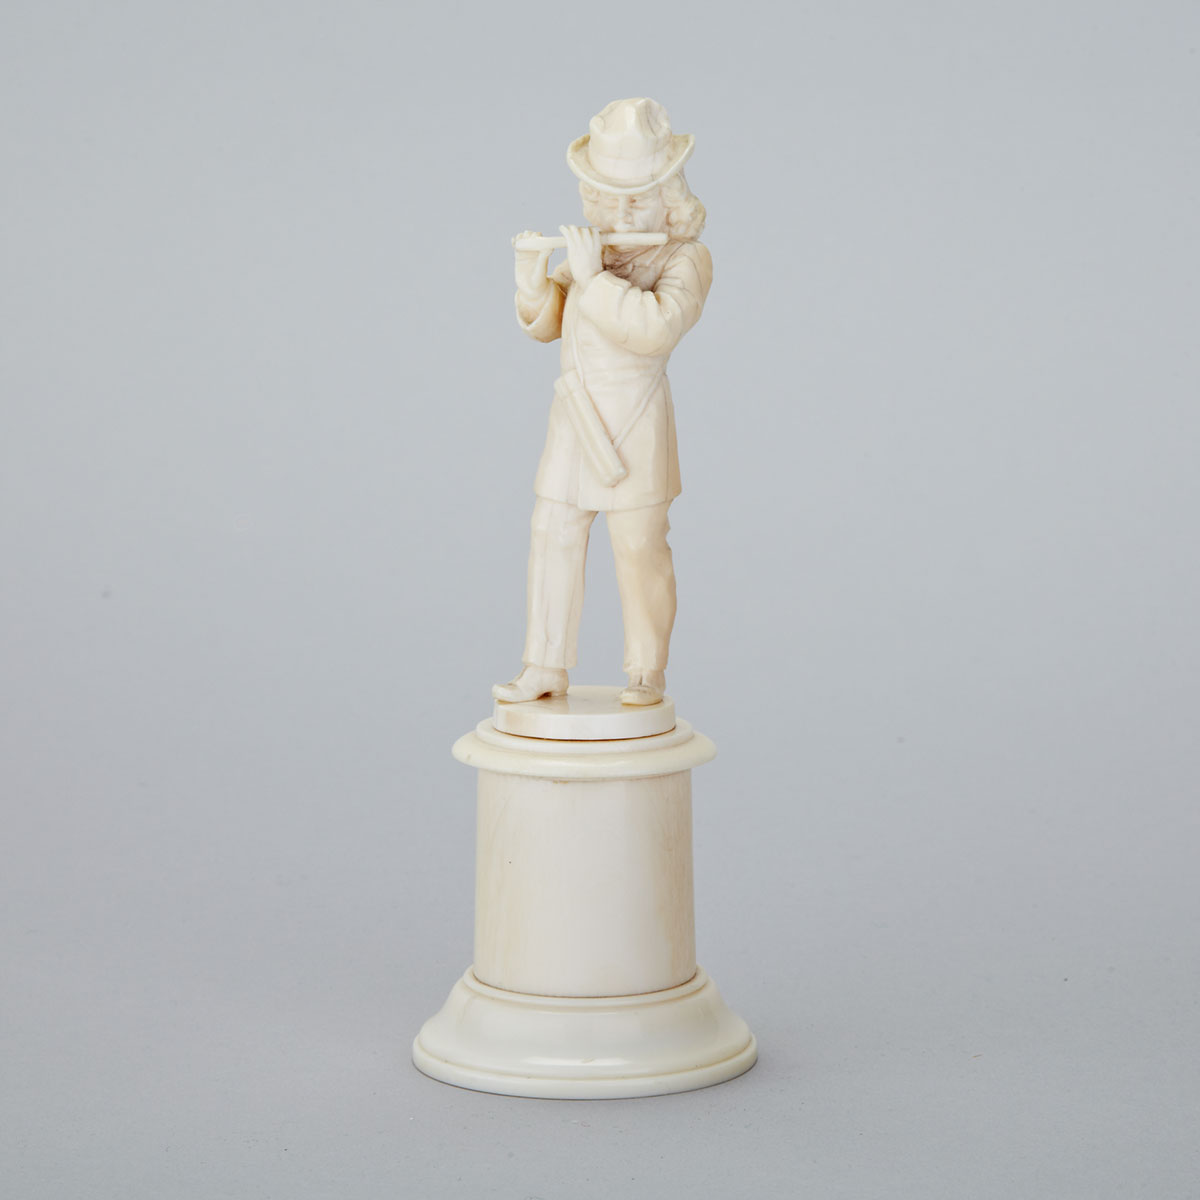 Dieppe Carved Ivory Miniature Figure of a Musician, 19th century